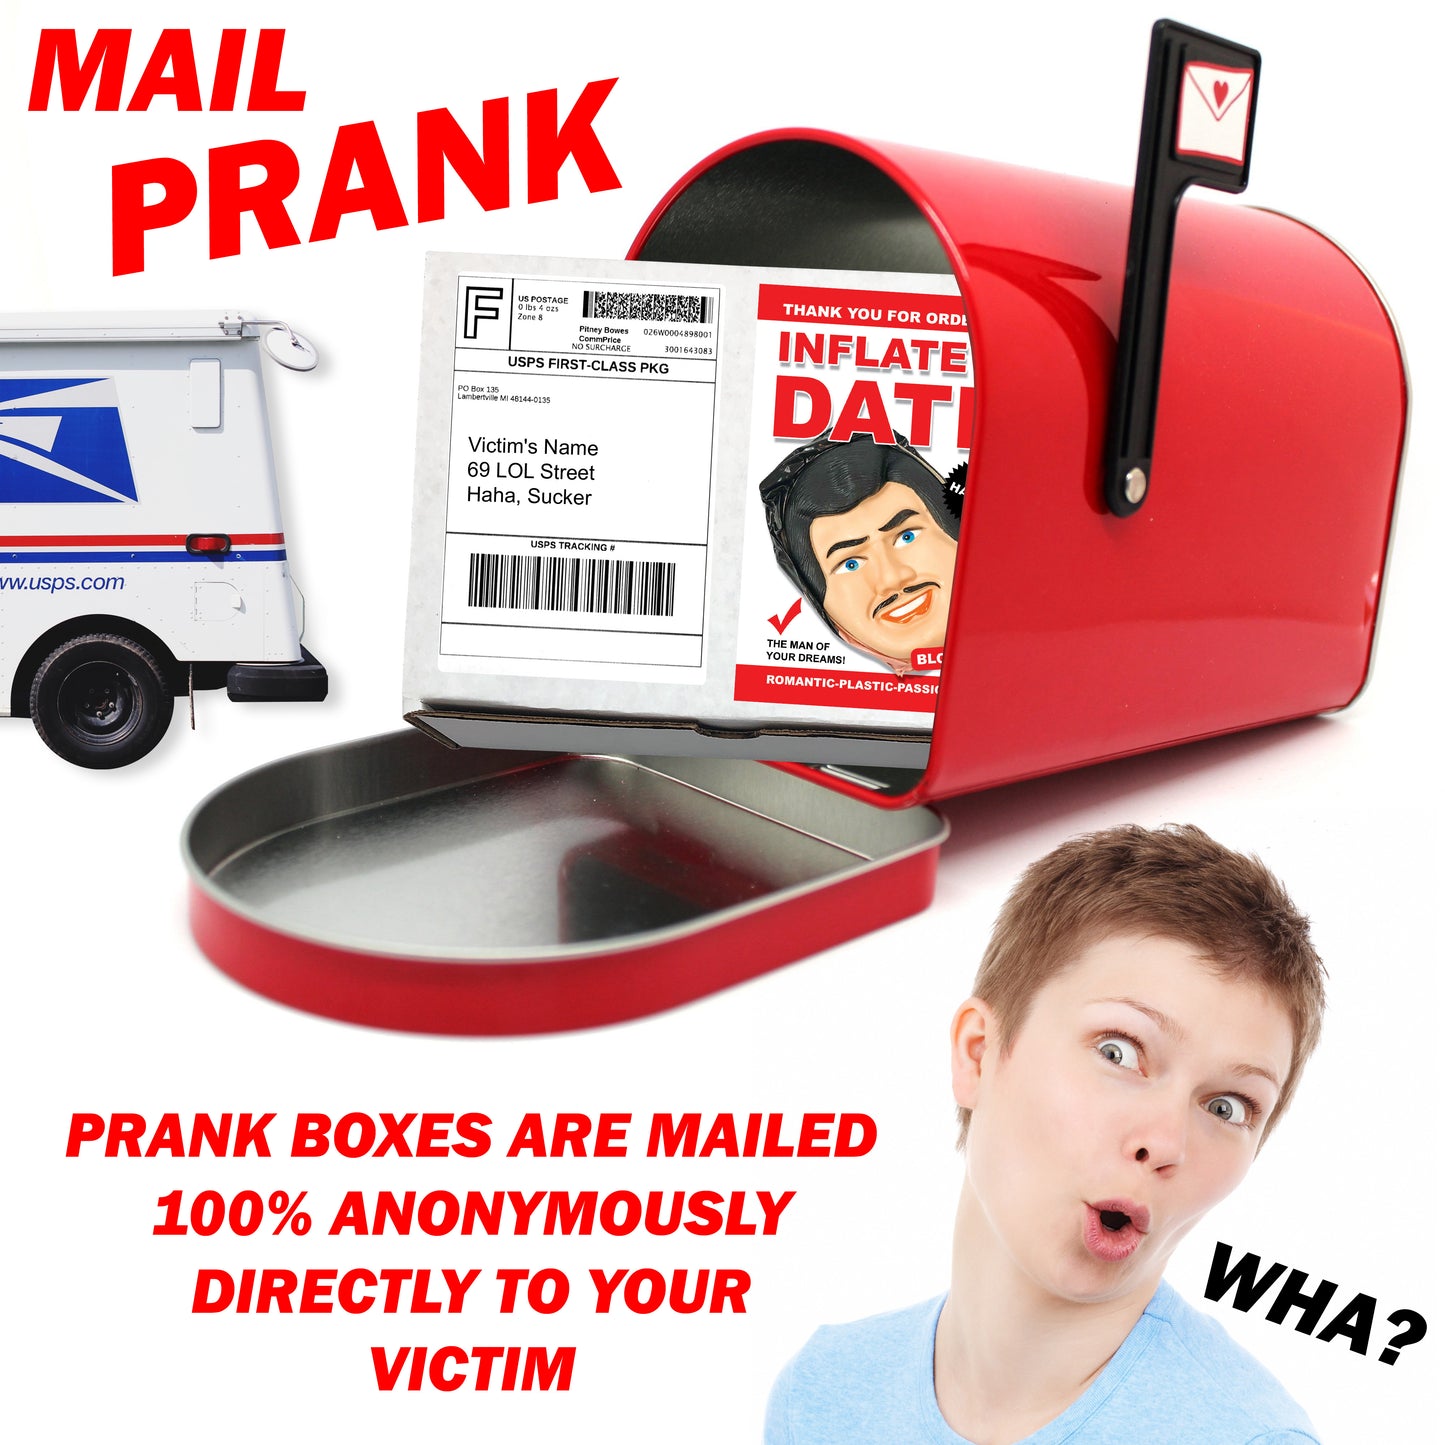 Inflate a Date embarrassing prank box gets mailed directly to your victims 100% anonymously!